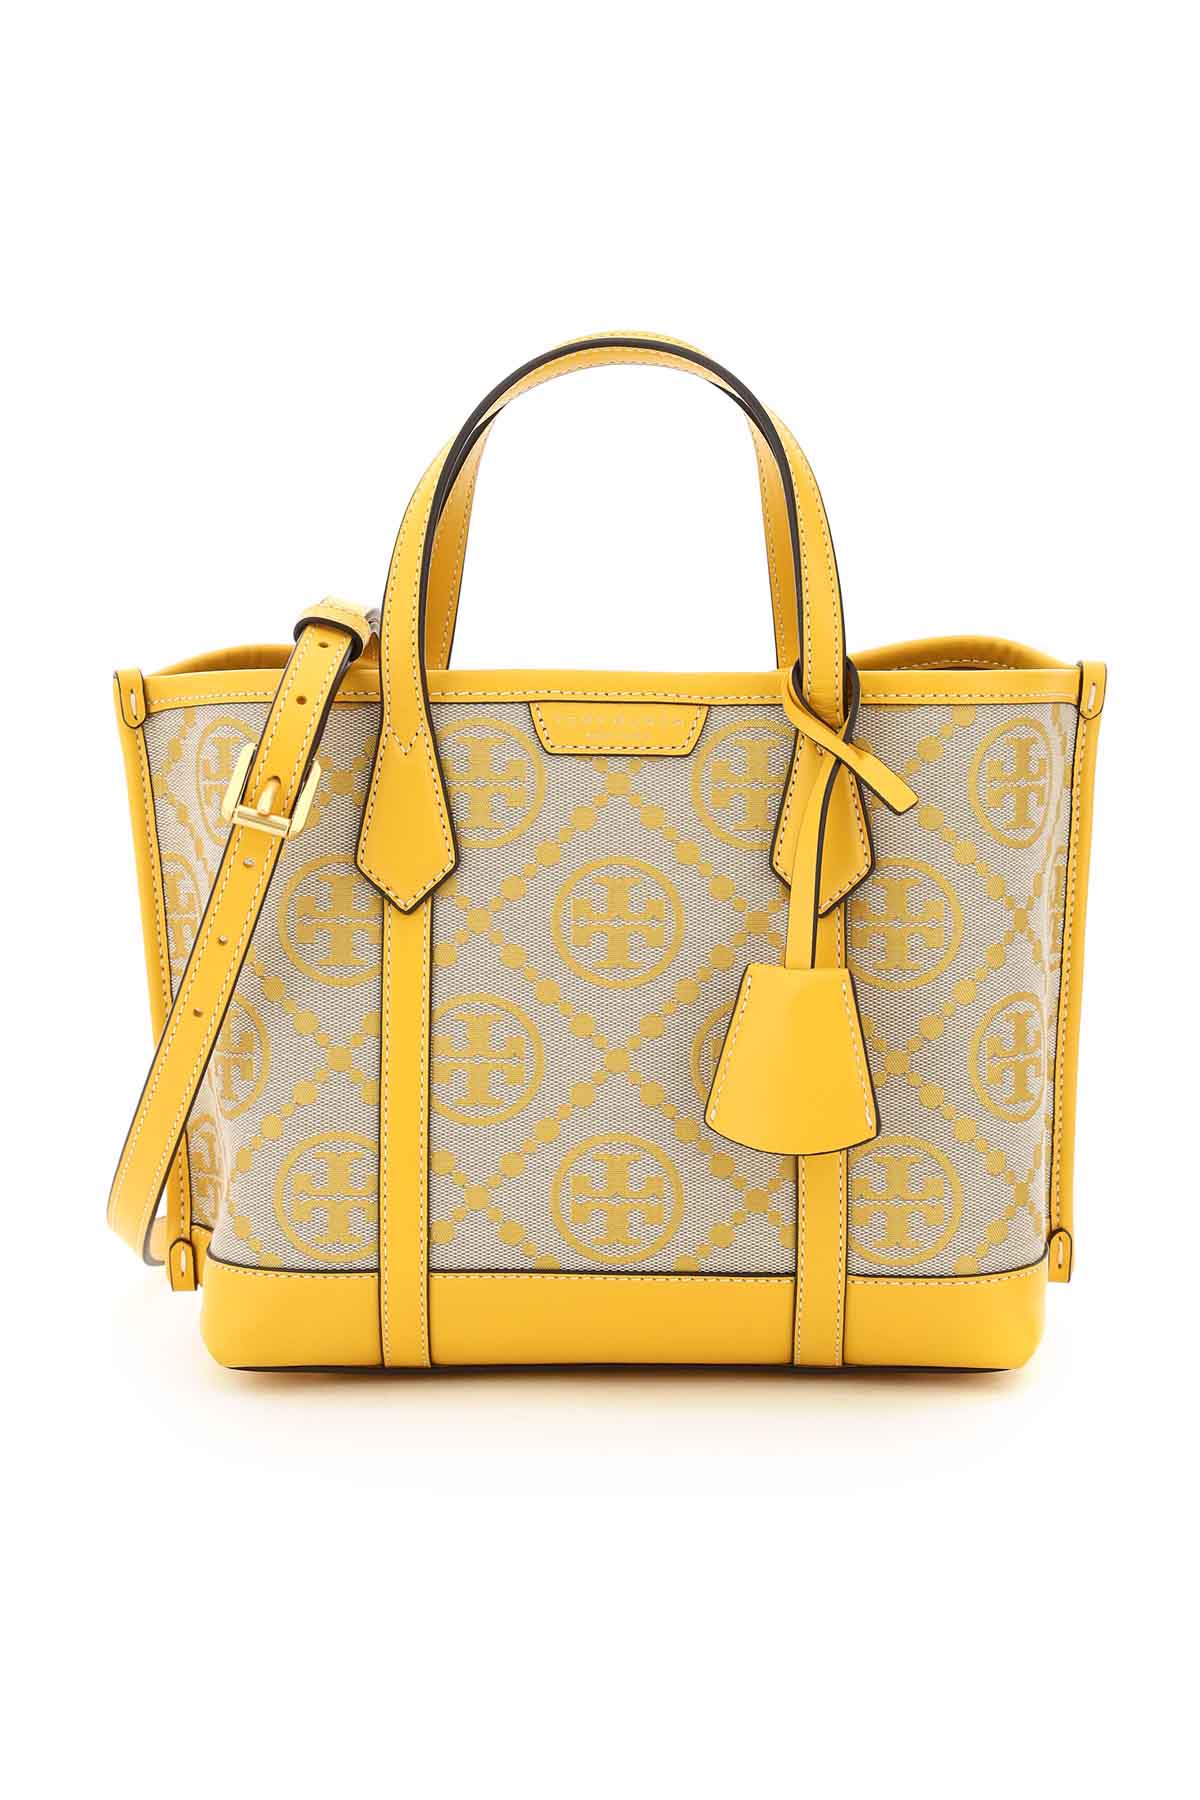 Tory Burch Perry Small Triple-Compartment Tote